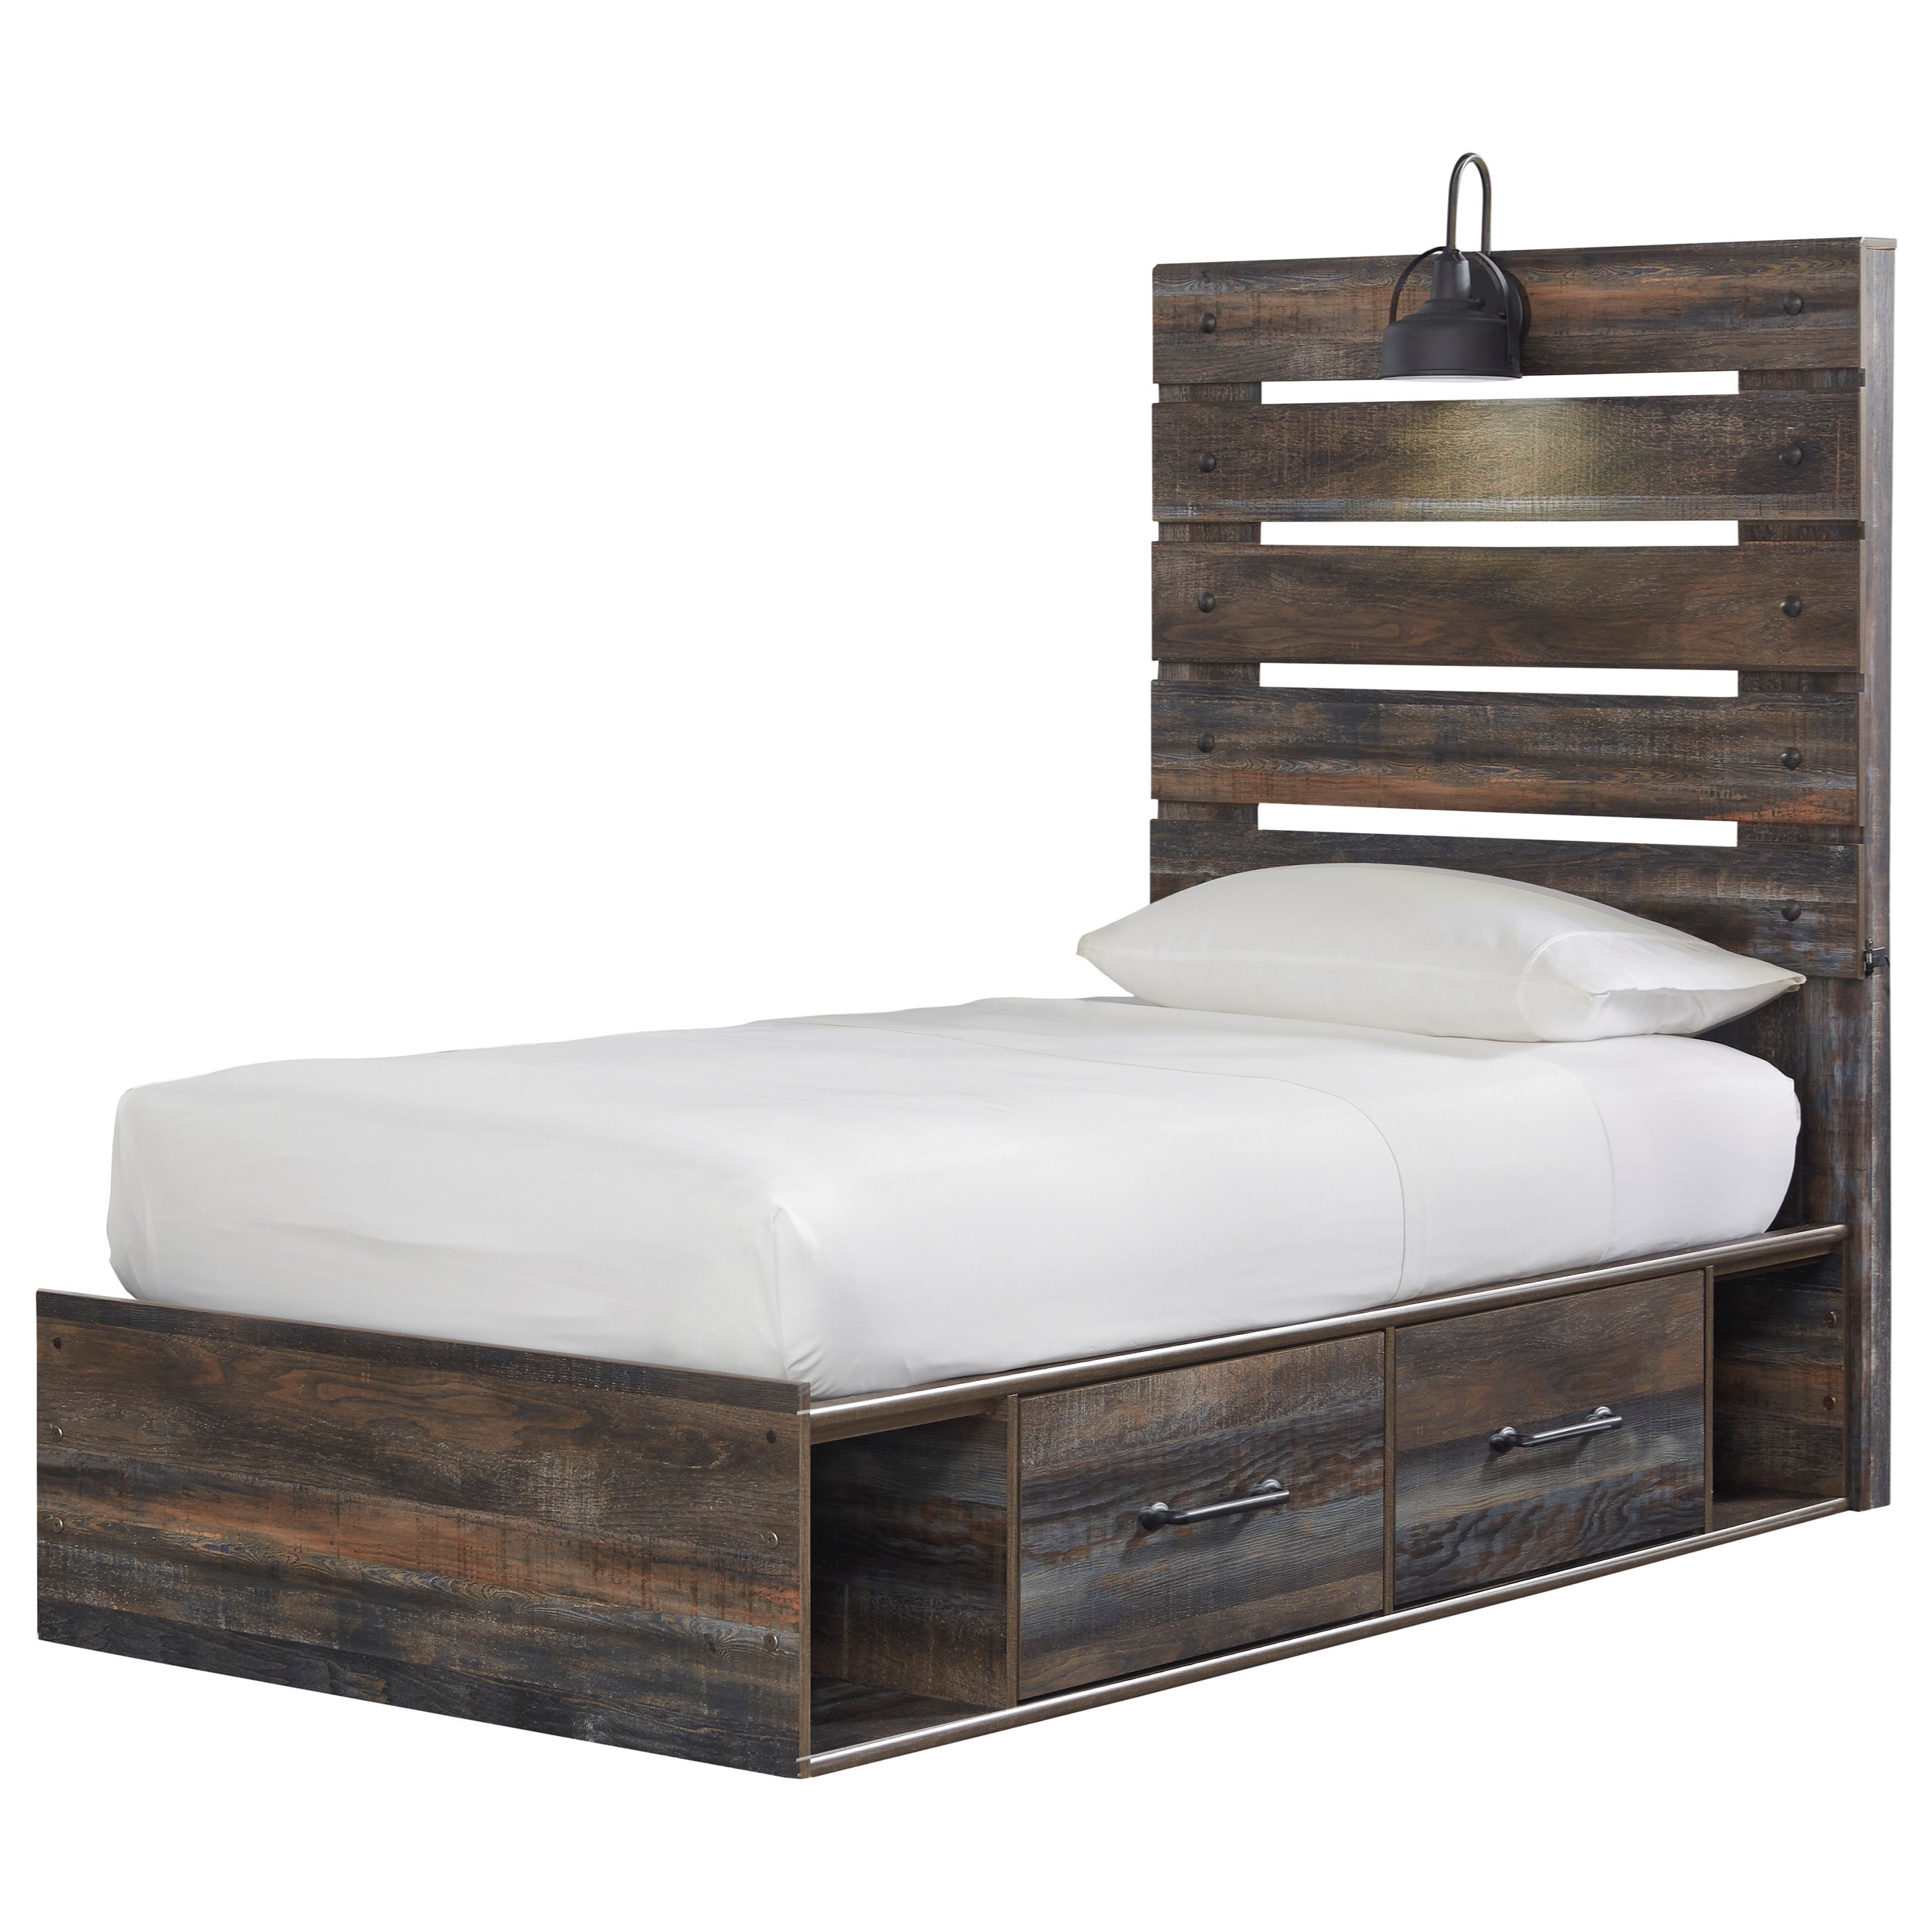 ashley twin bed with trundle